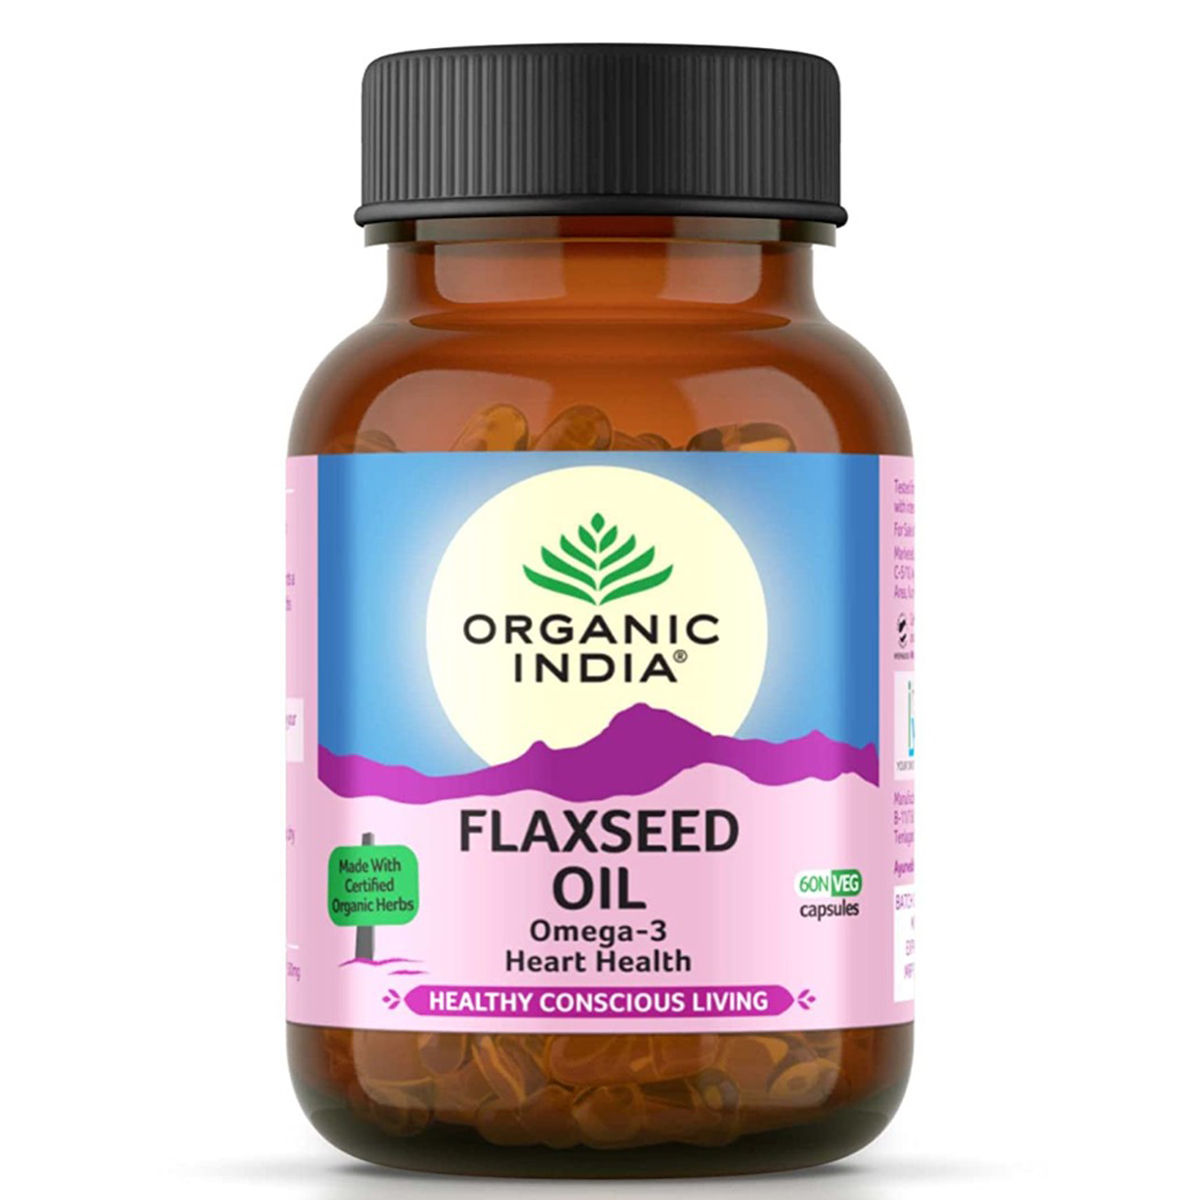 Buy Organic India Flaxseed Oil for Heart Health, 60 Veg Capsules Online